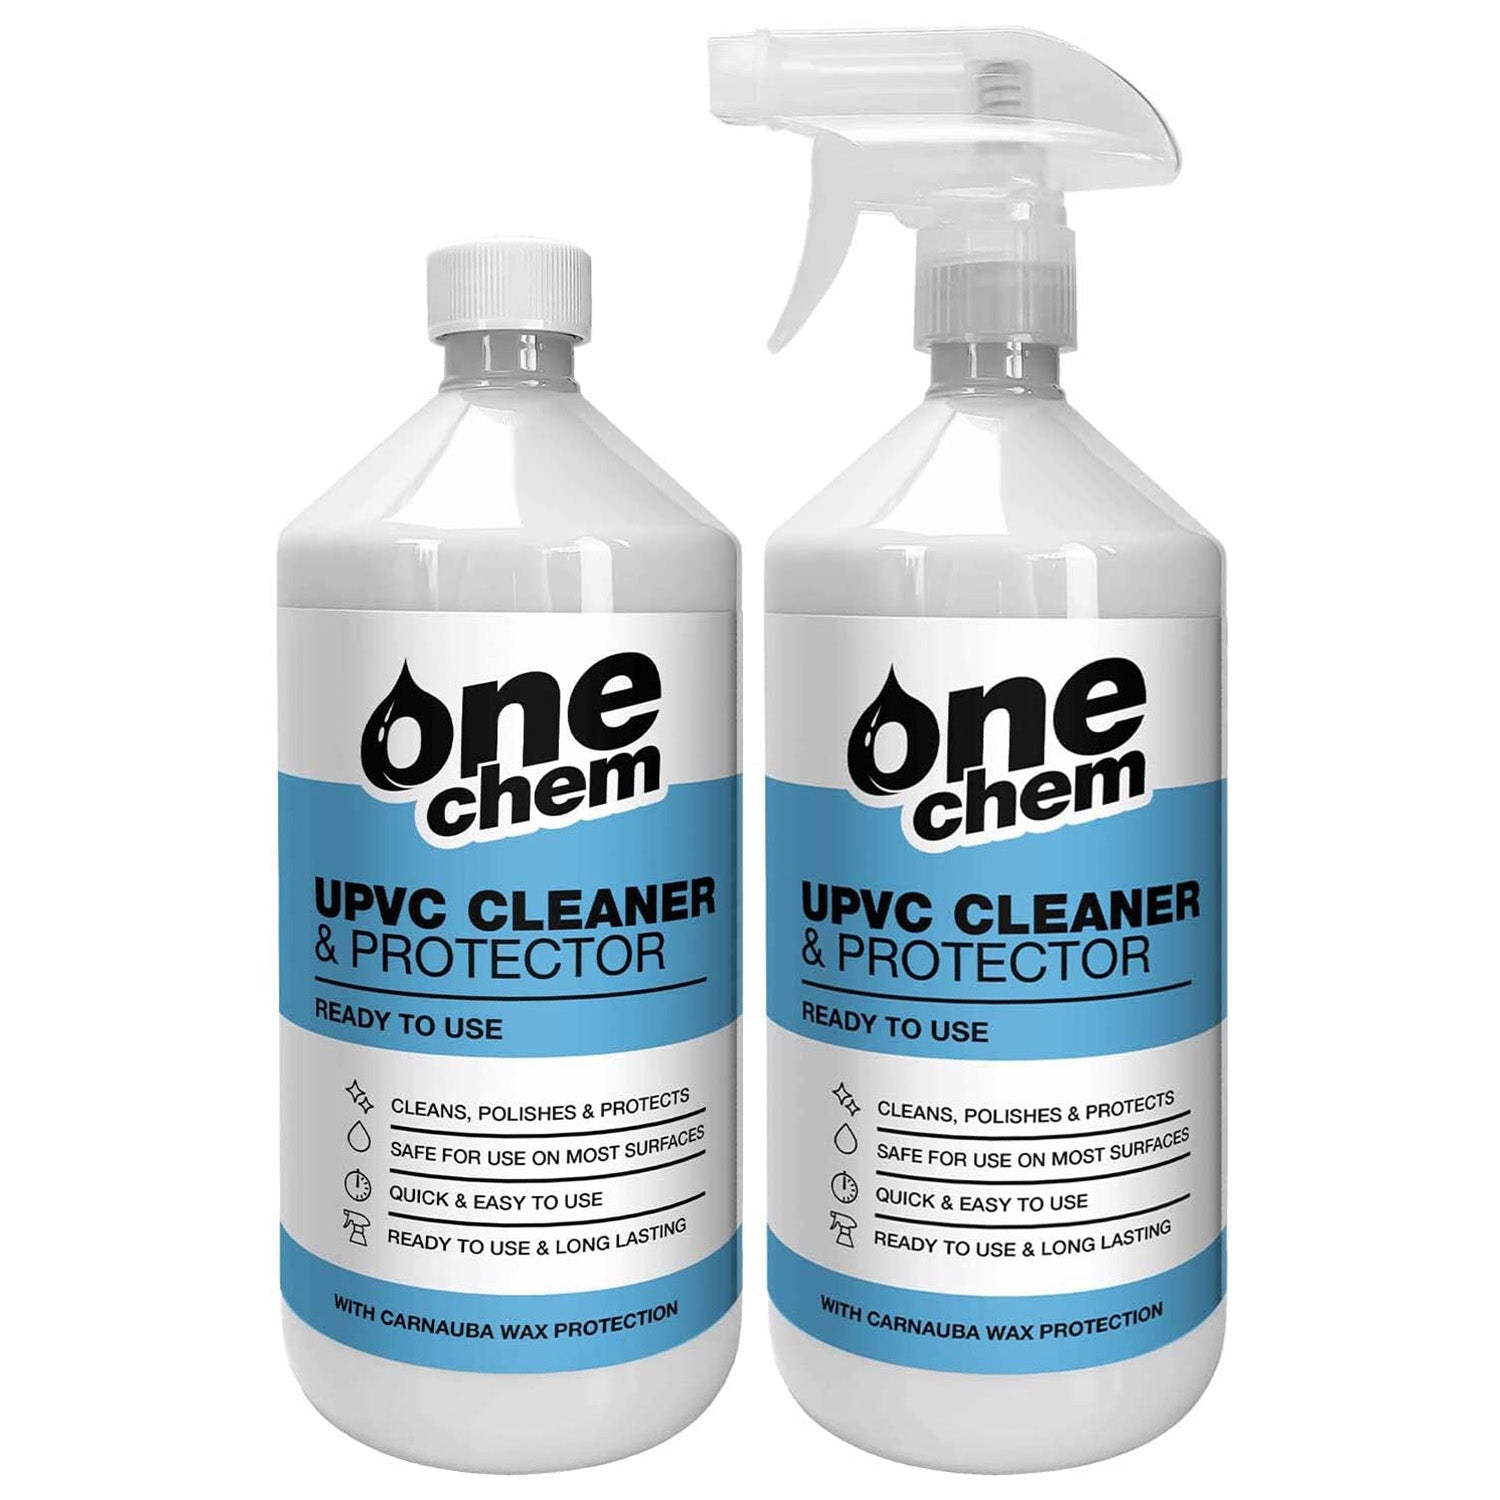 One Chem UPVC Cleaner & Protector 2 x 1L